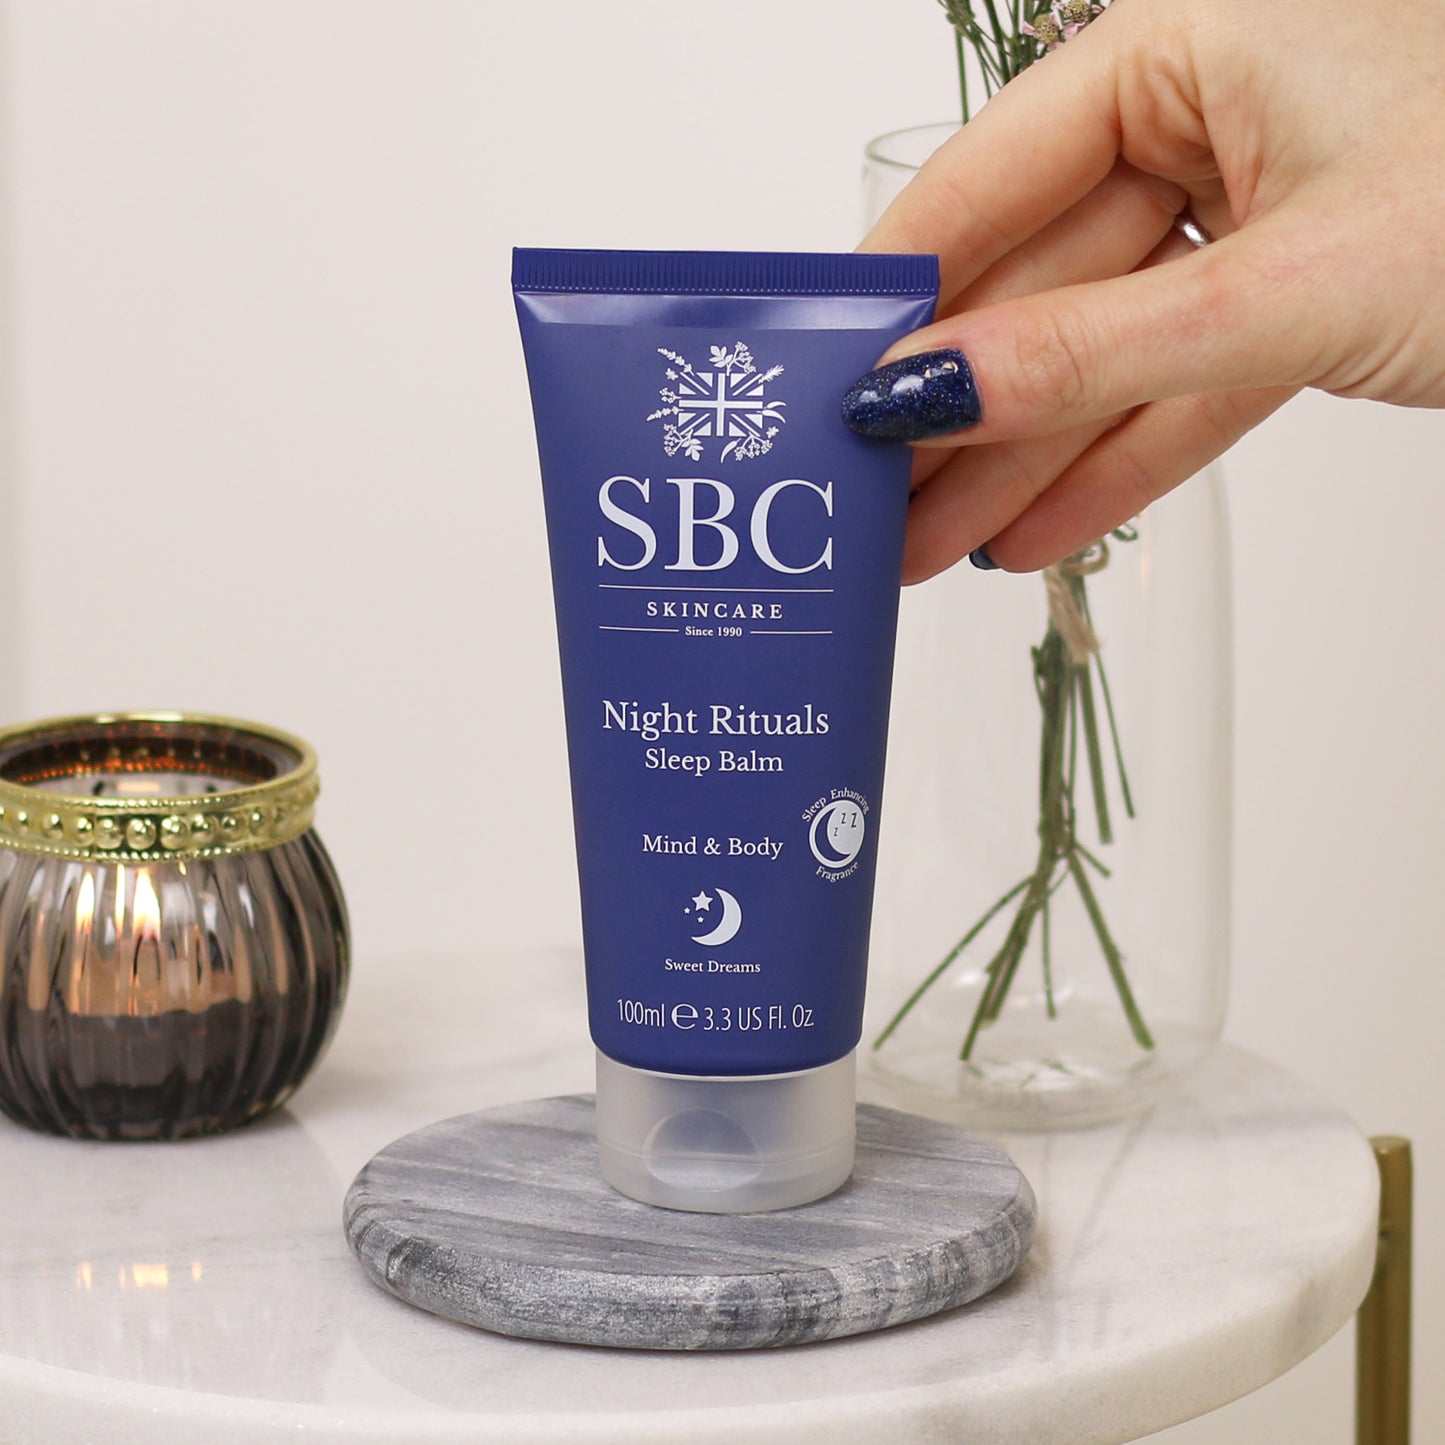 Night Rituals Sleep Balm 100ml being held by a hand with sparkly blue nails 